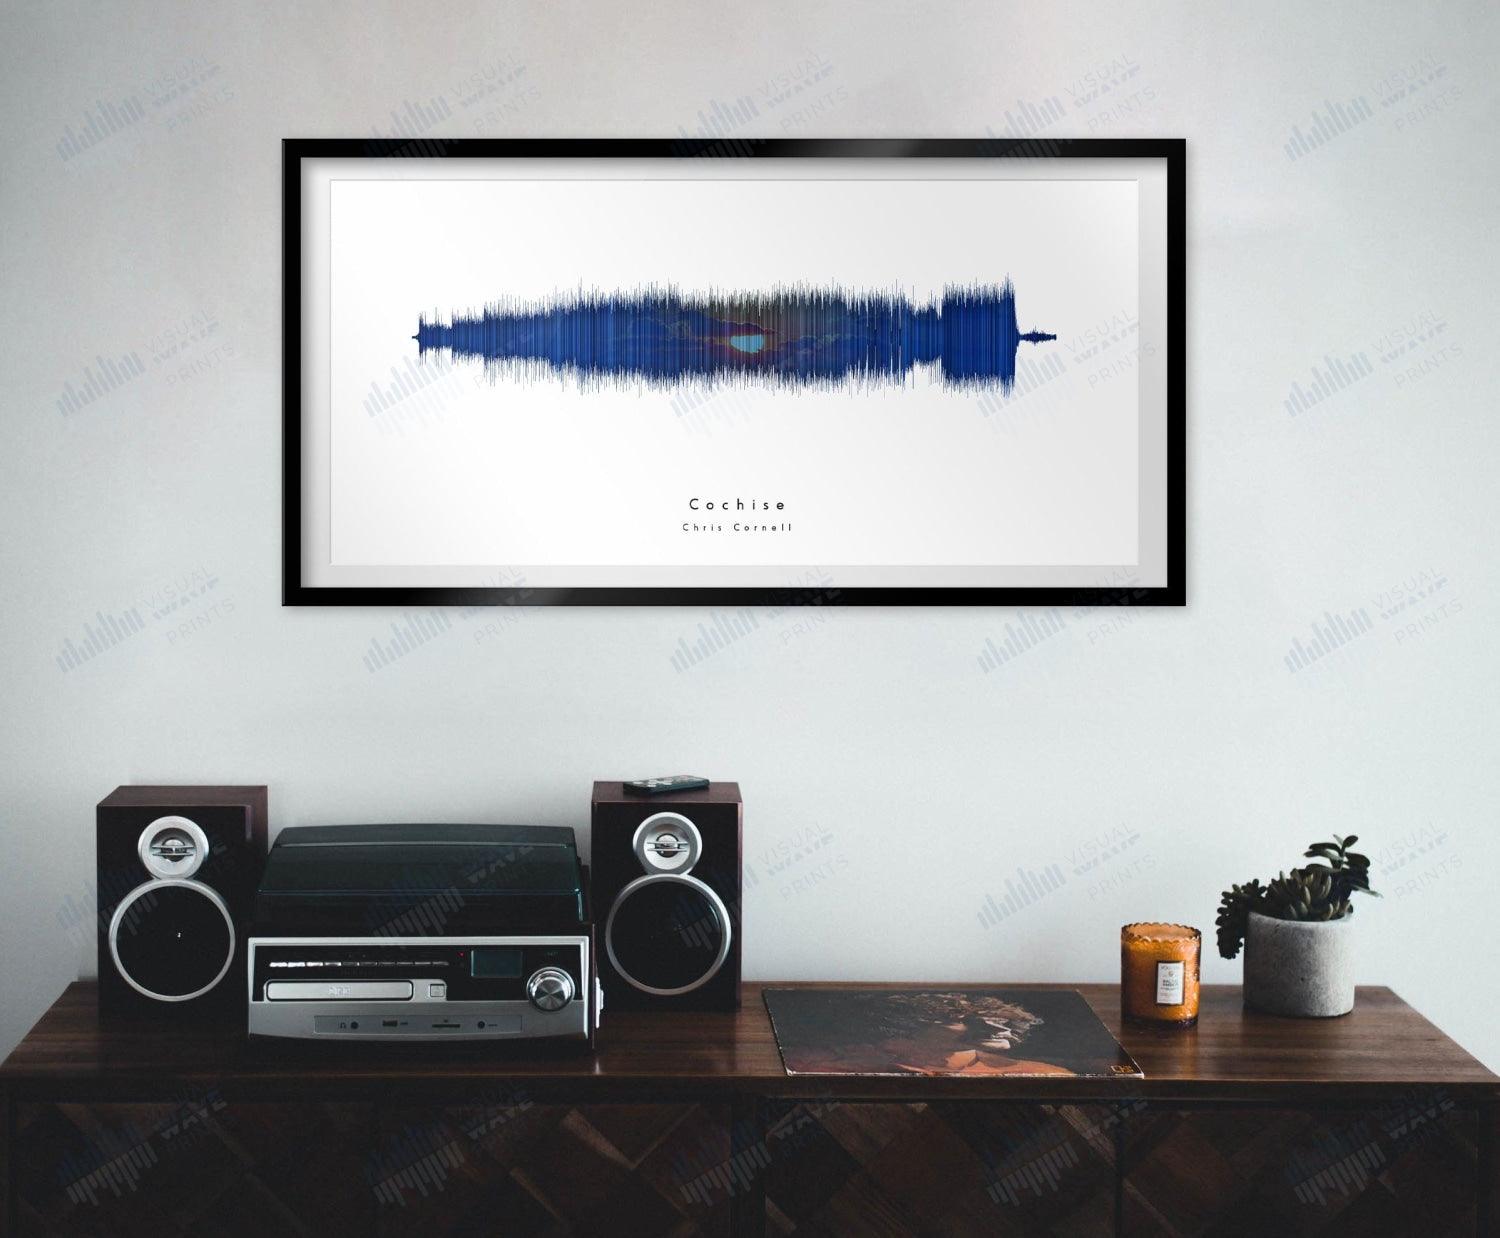 Cochise by Chris Cornell - Visual Wave Prints